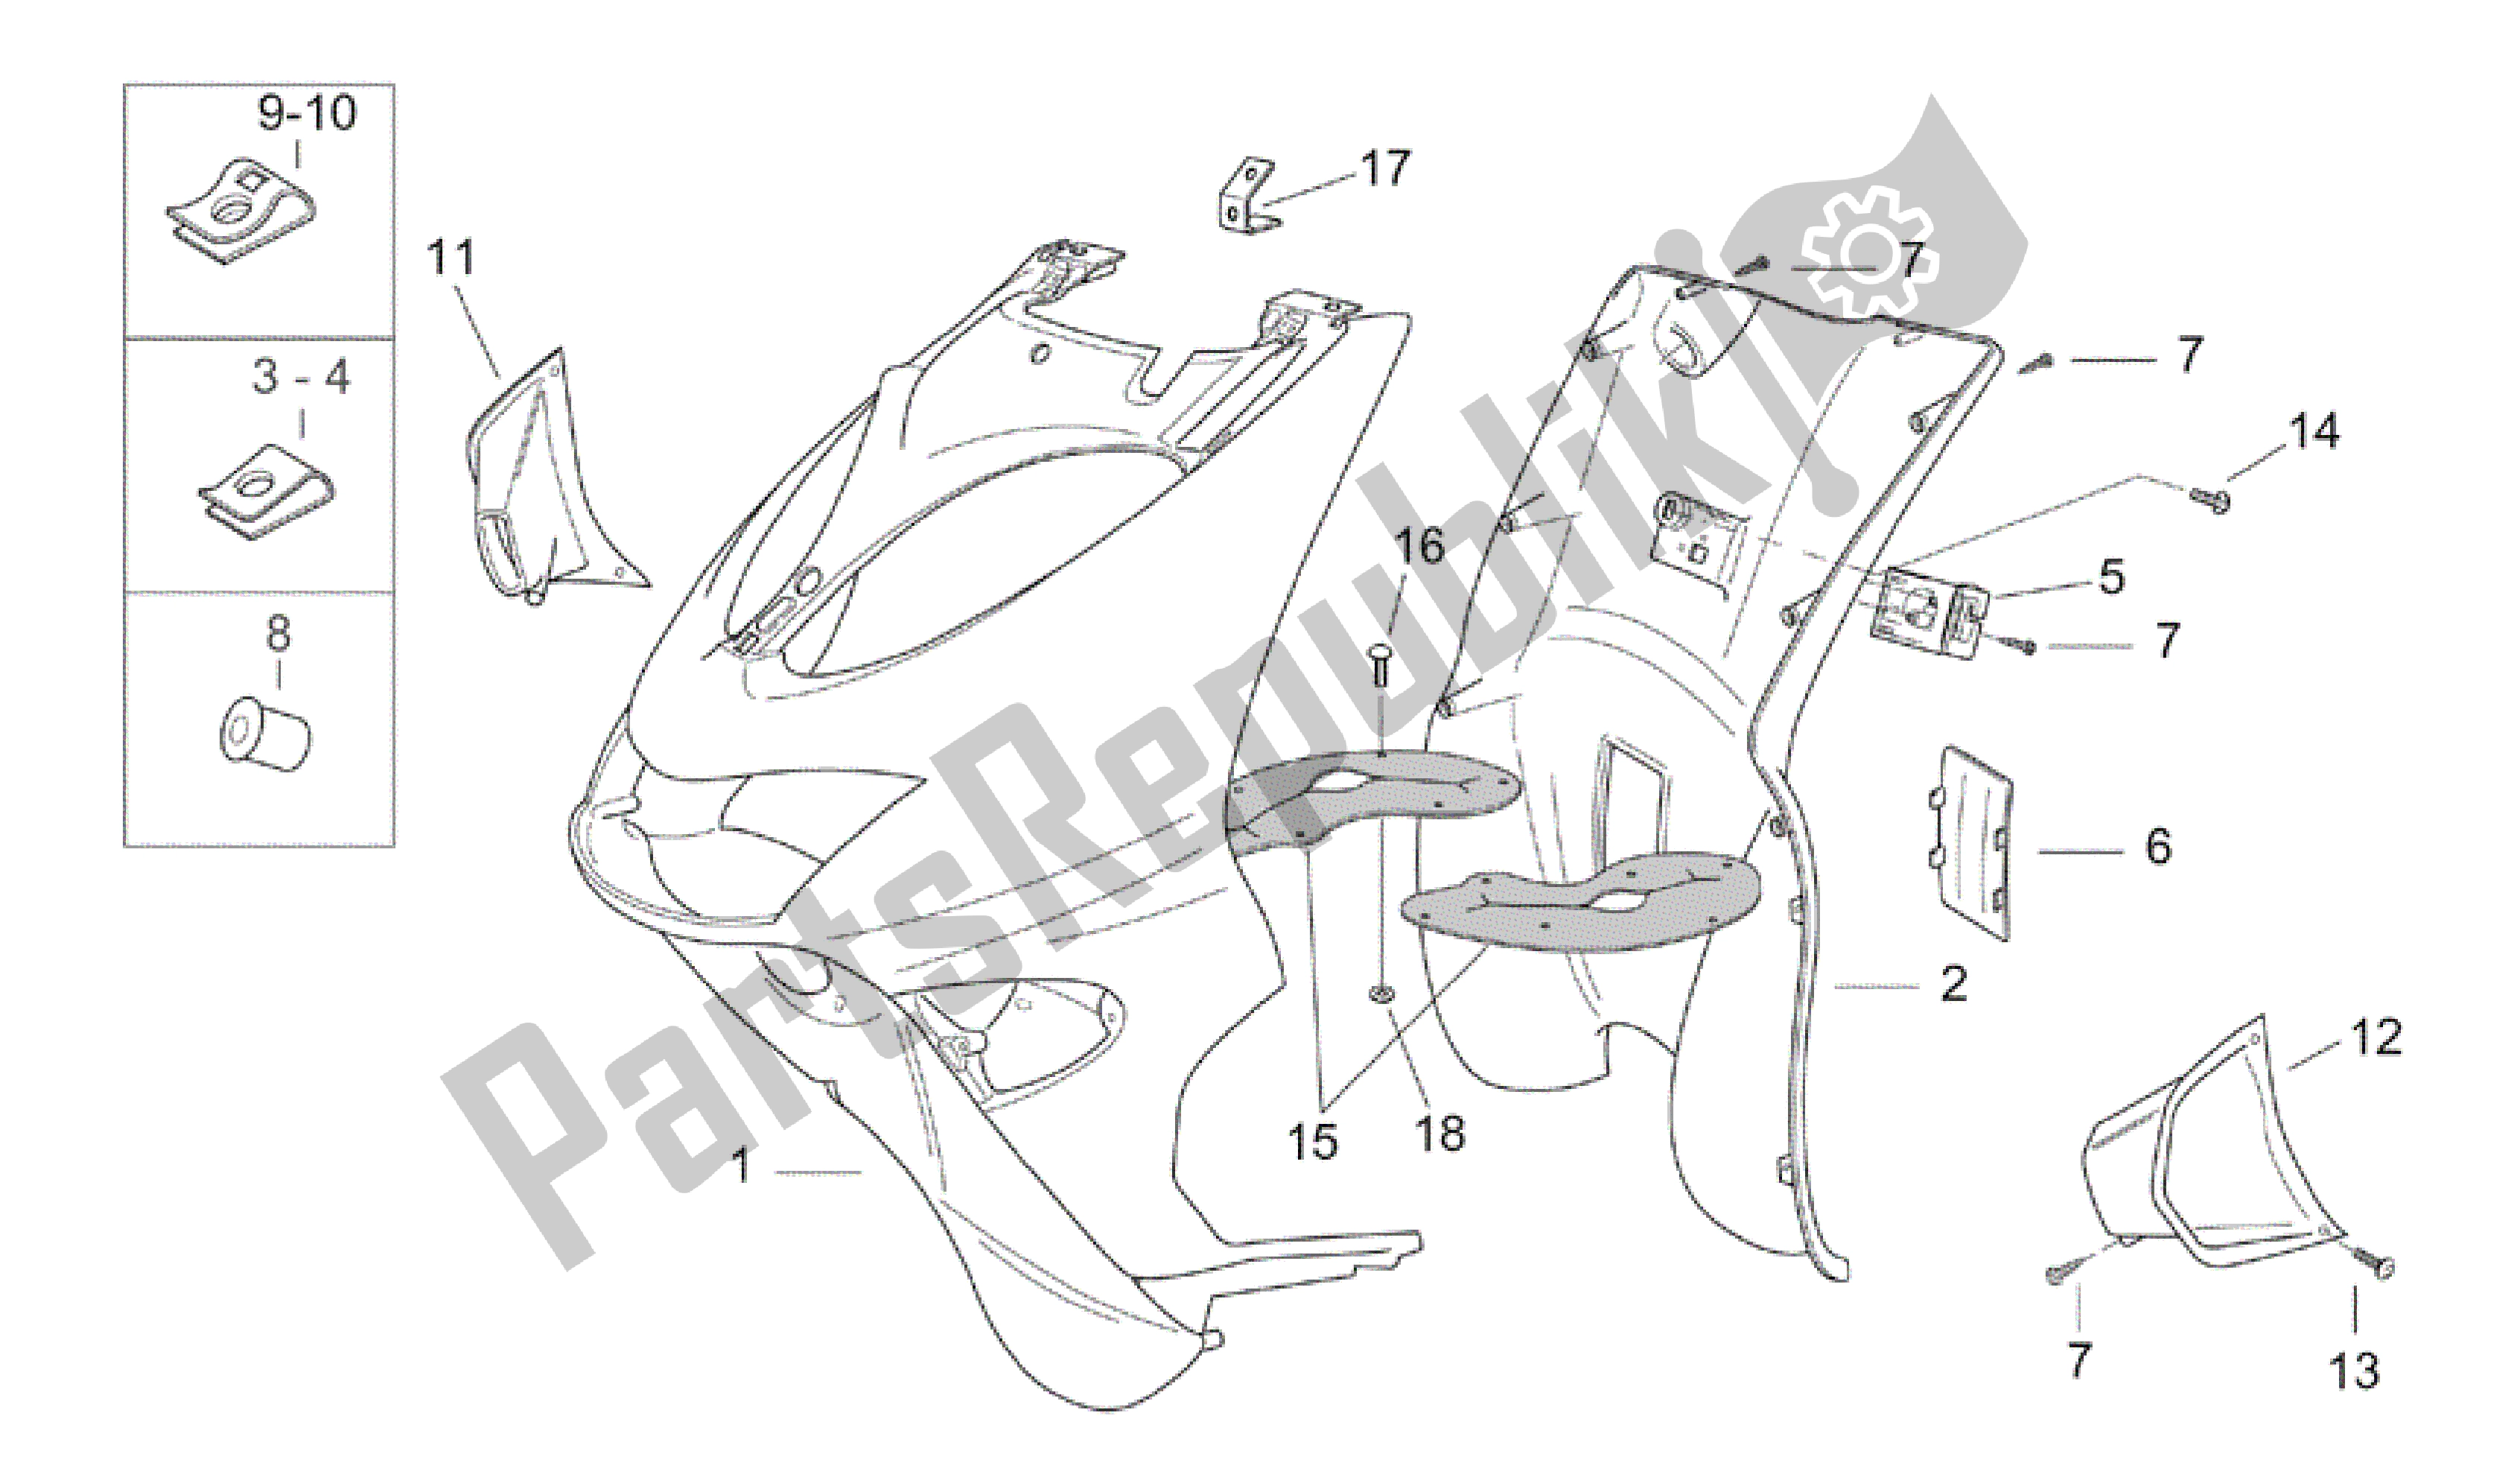 All parts for the Front Body Iii of the Aprilia SR 50 2000 - 2004